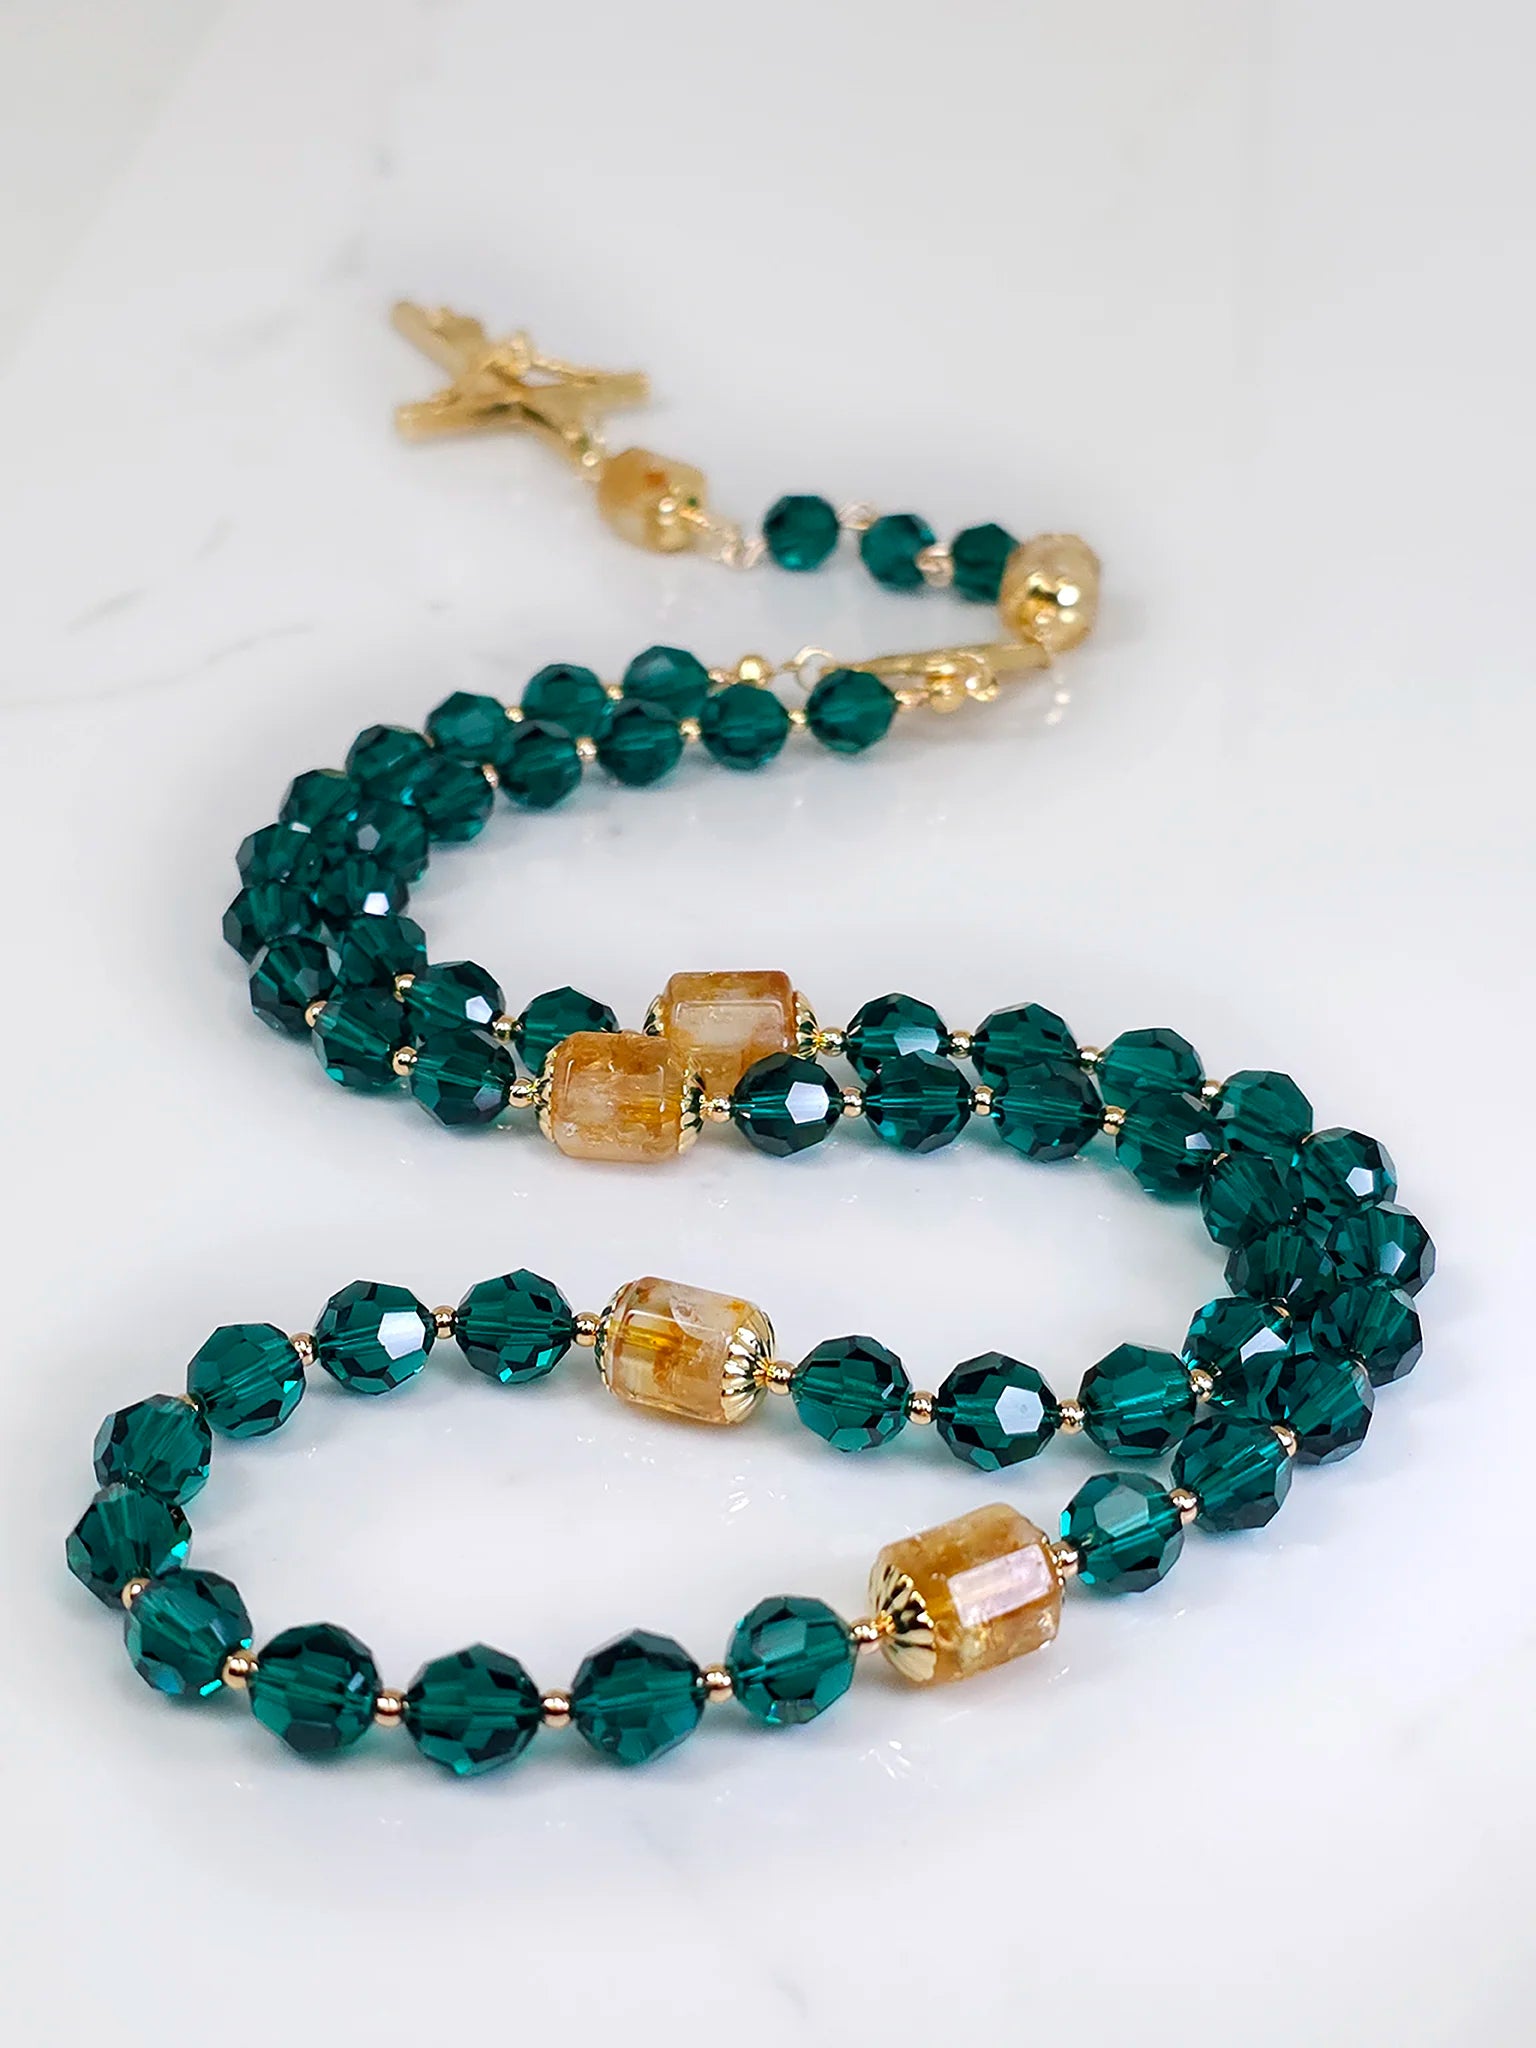 Delicate rosary design with green beads and gold details, artistically spread on a pristine white table.